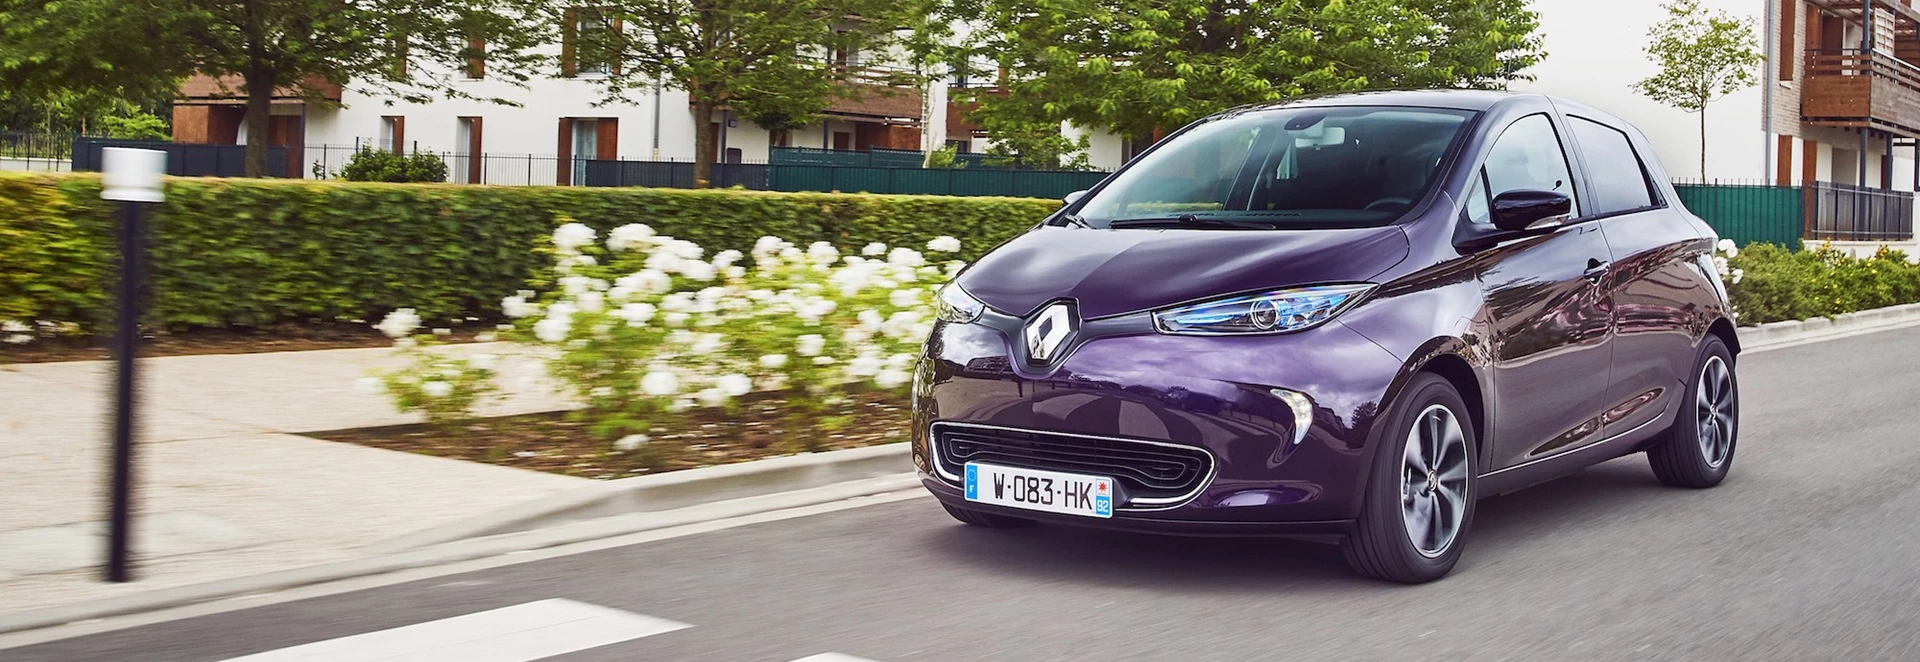 Groupe Renault post record sales for start of 2018